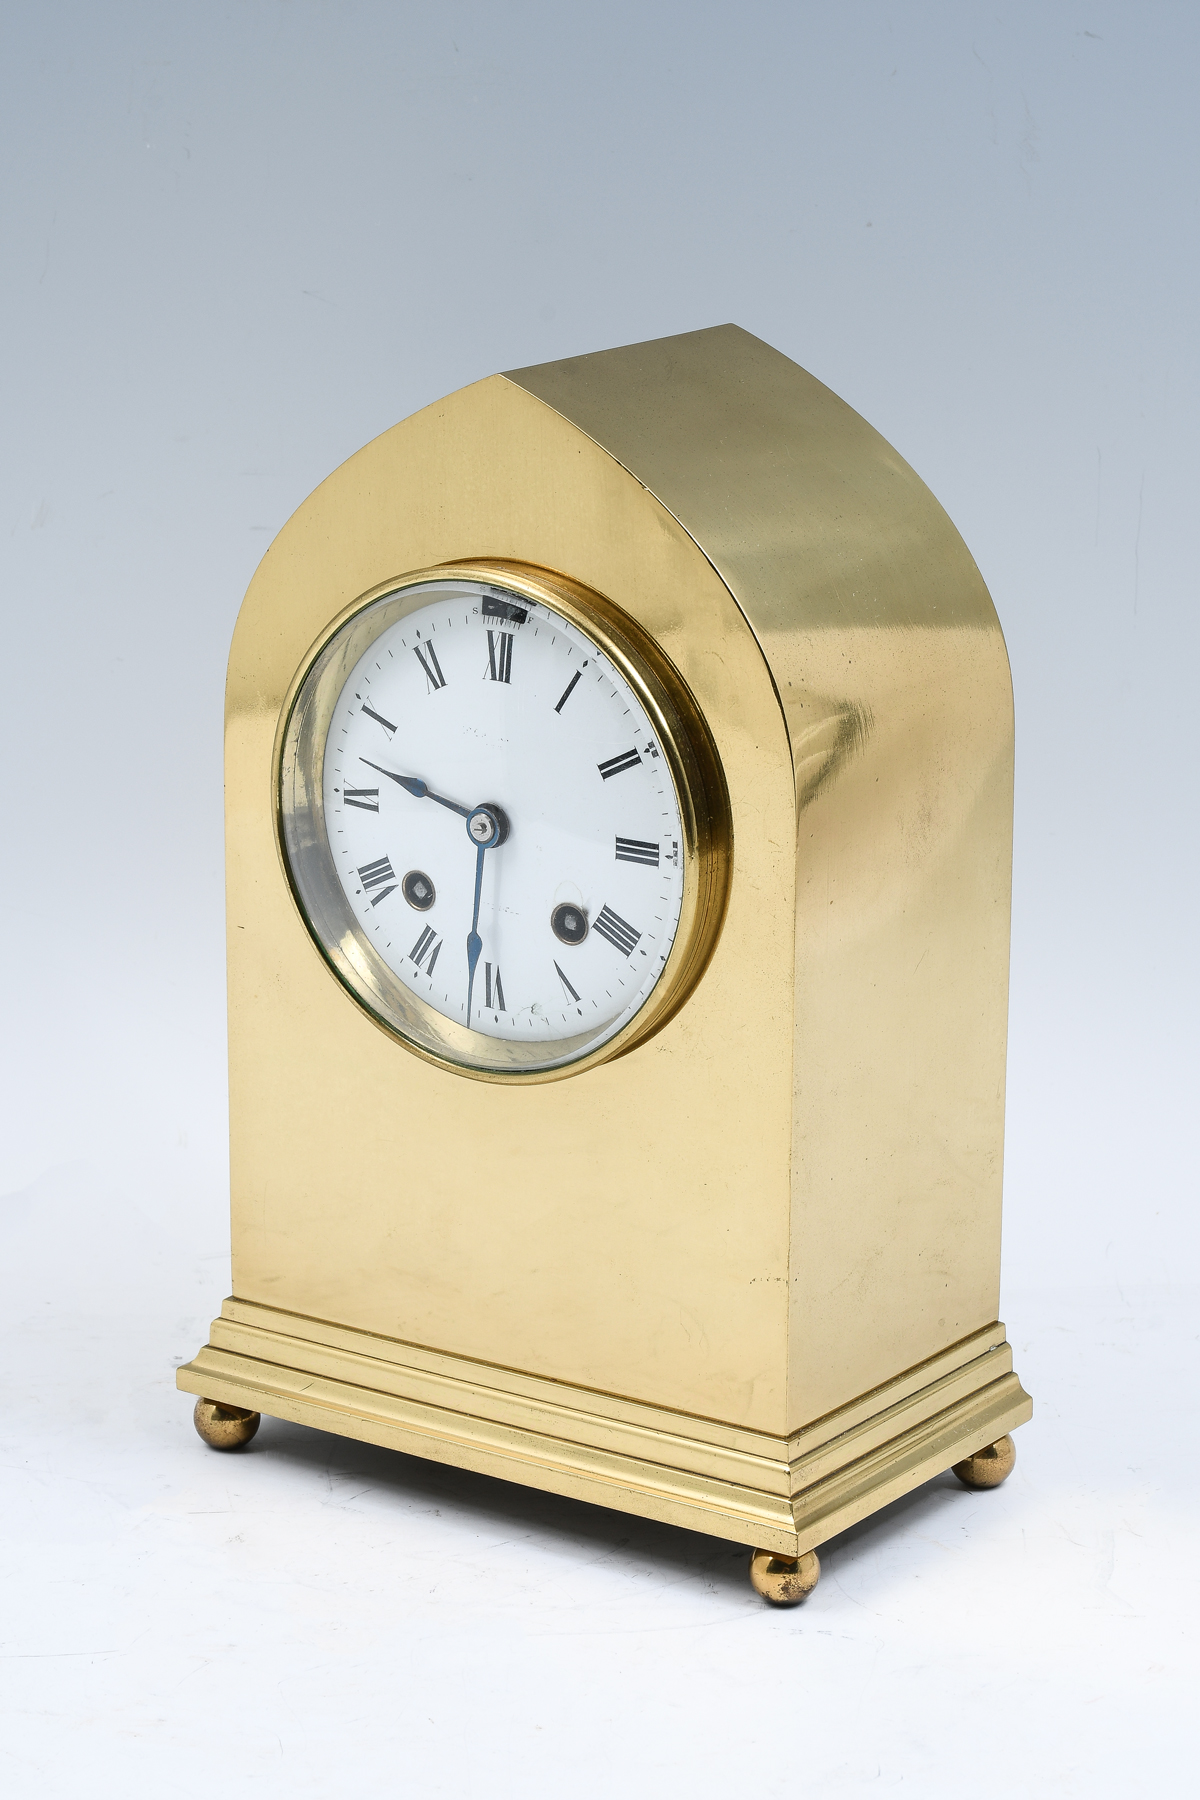 CHELSEA BRASS GOTHIC CLOCK: A mid 20th